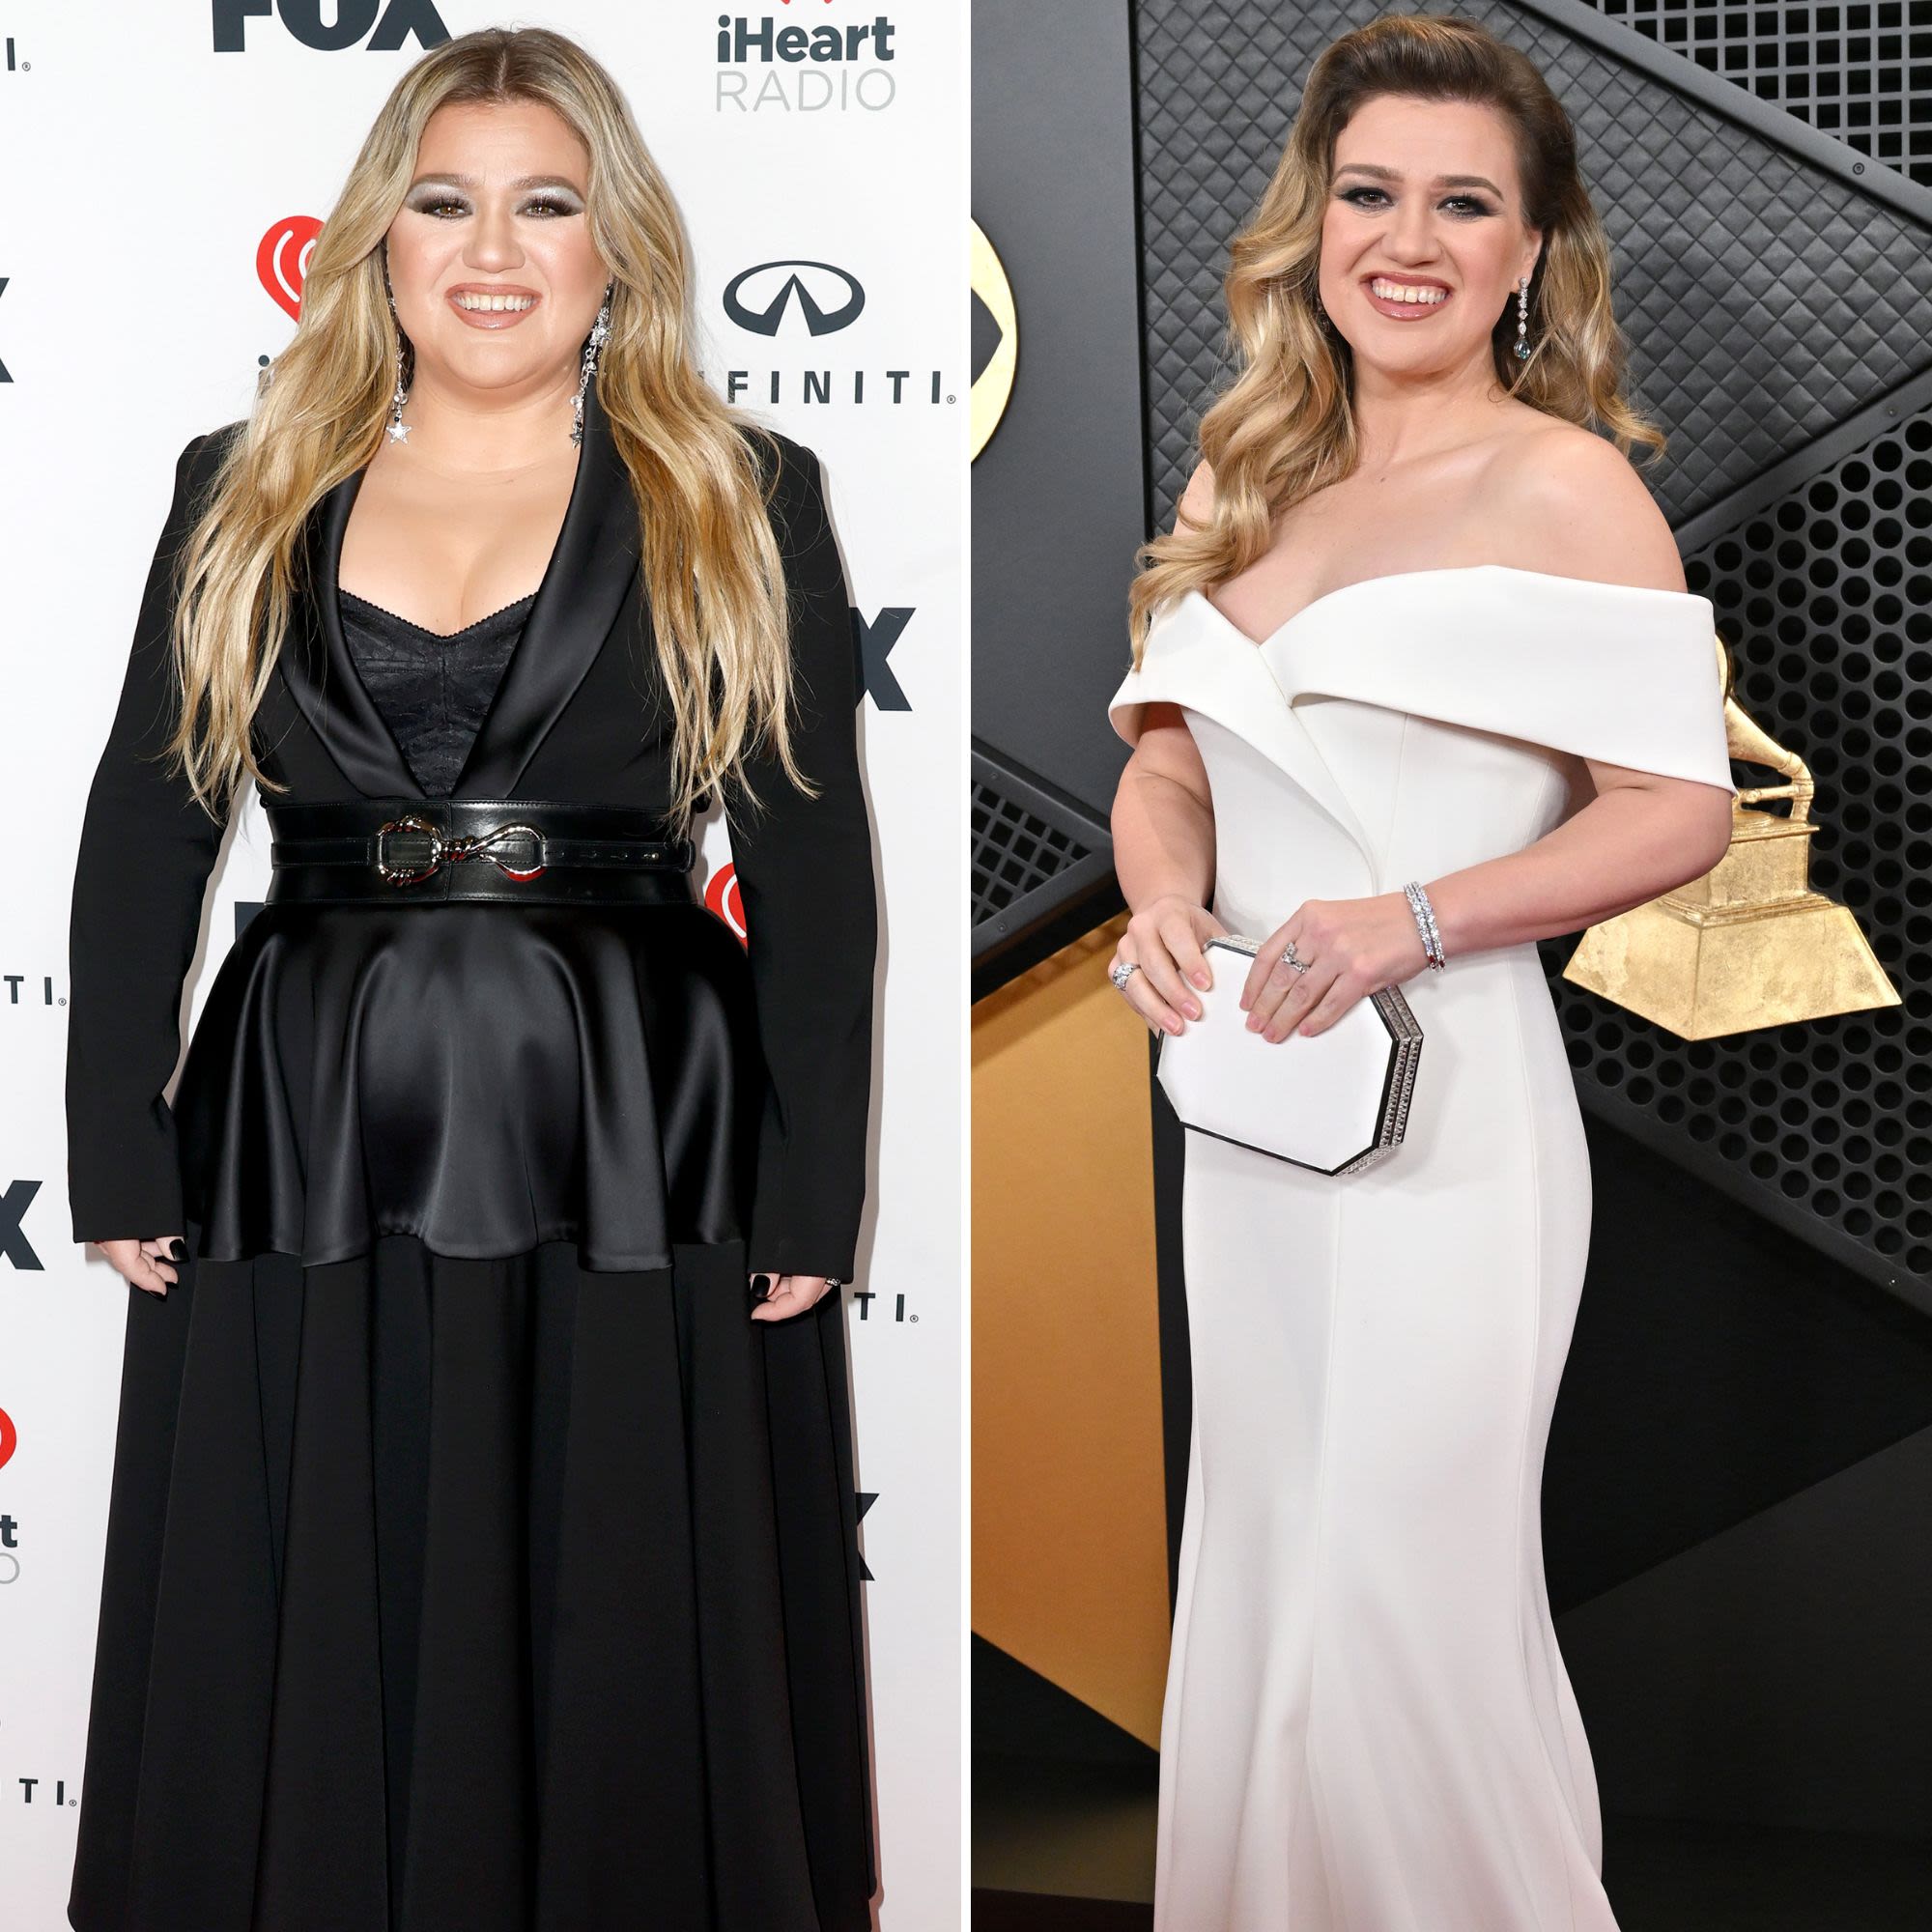 Kelly Clarkson’s New Weight-Loss Goal: She Wants to ‘Get Into the Bikini She’s Been Dreaming Of’